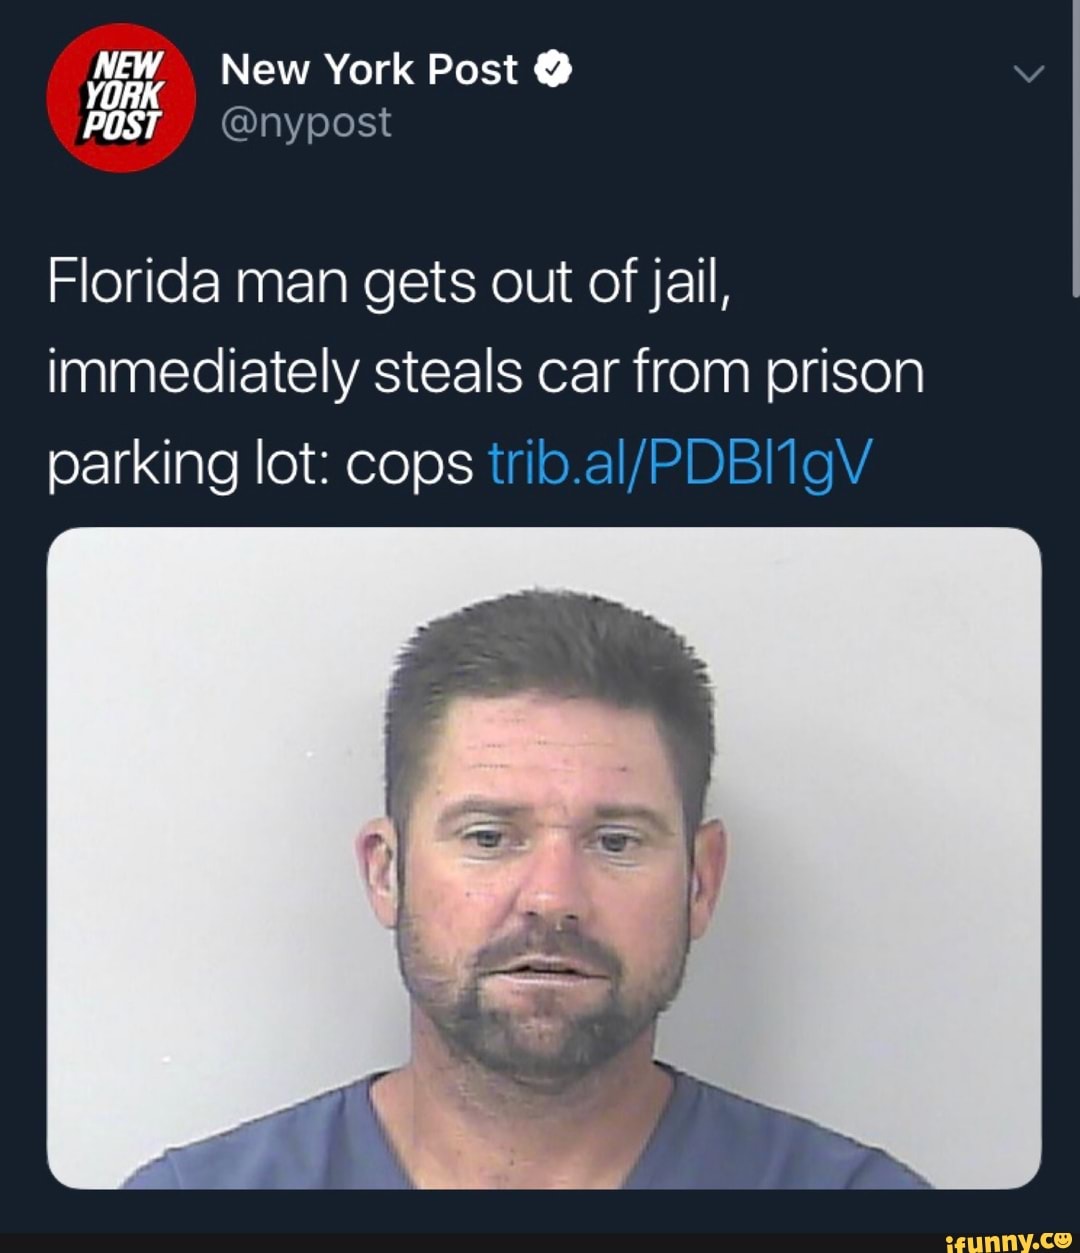 NEW YaHK New York Post º FUST nypost Florida man gets out ofjail